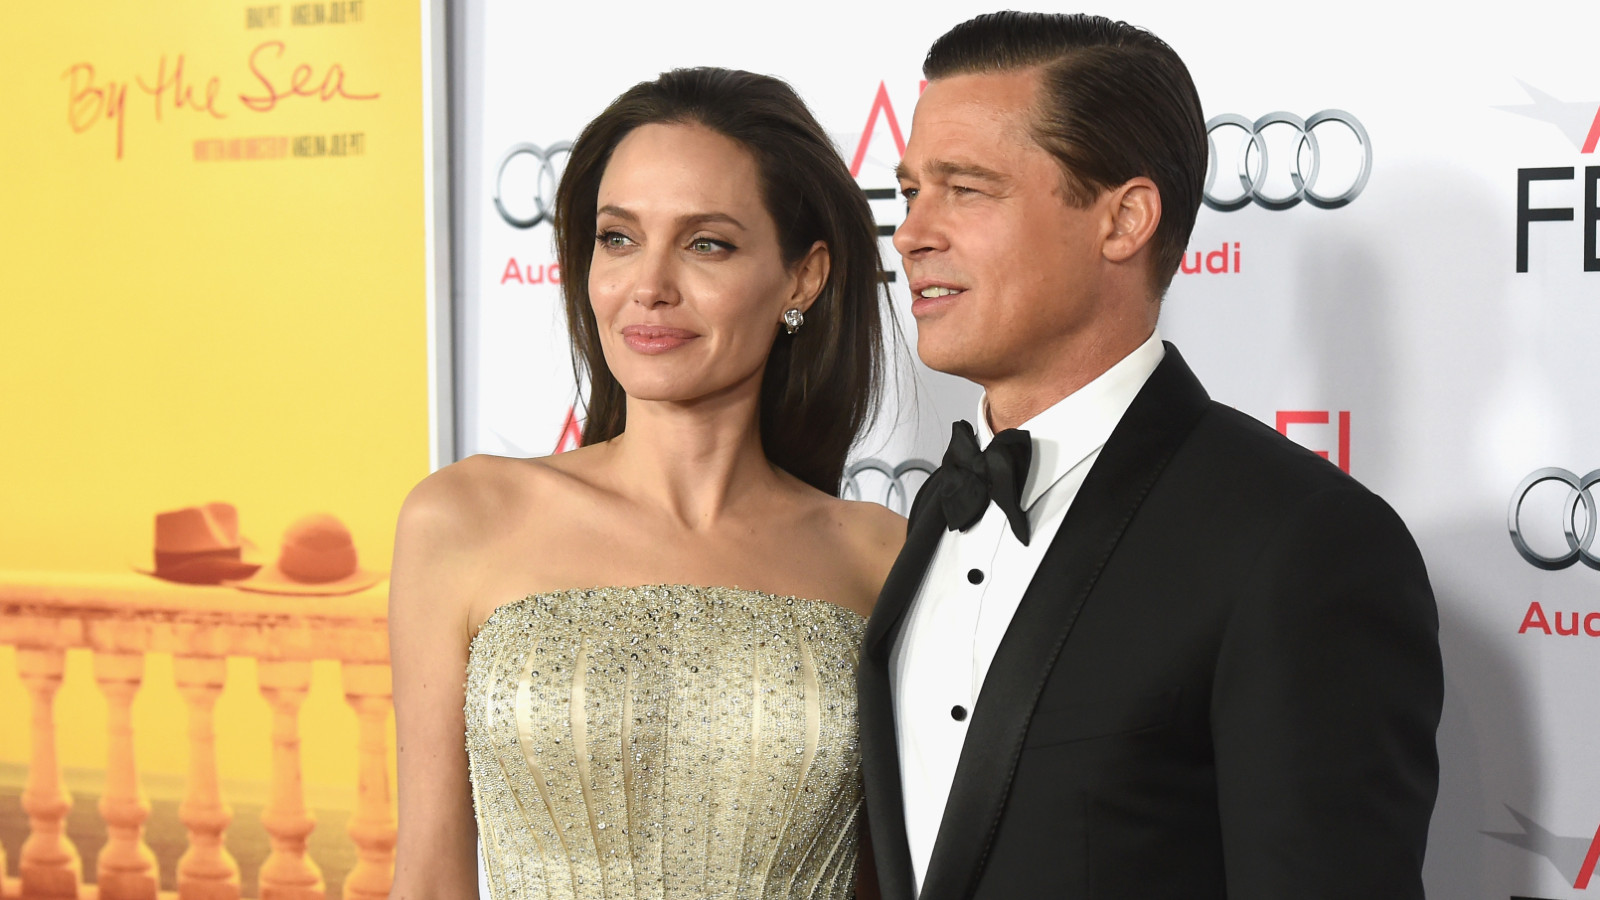 Angelina Jolie 'told the FBI' that Brad Pitt 'poured beer' on her during  2016 private jet fight